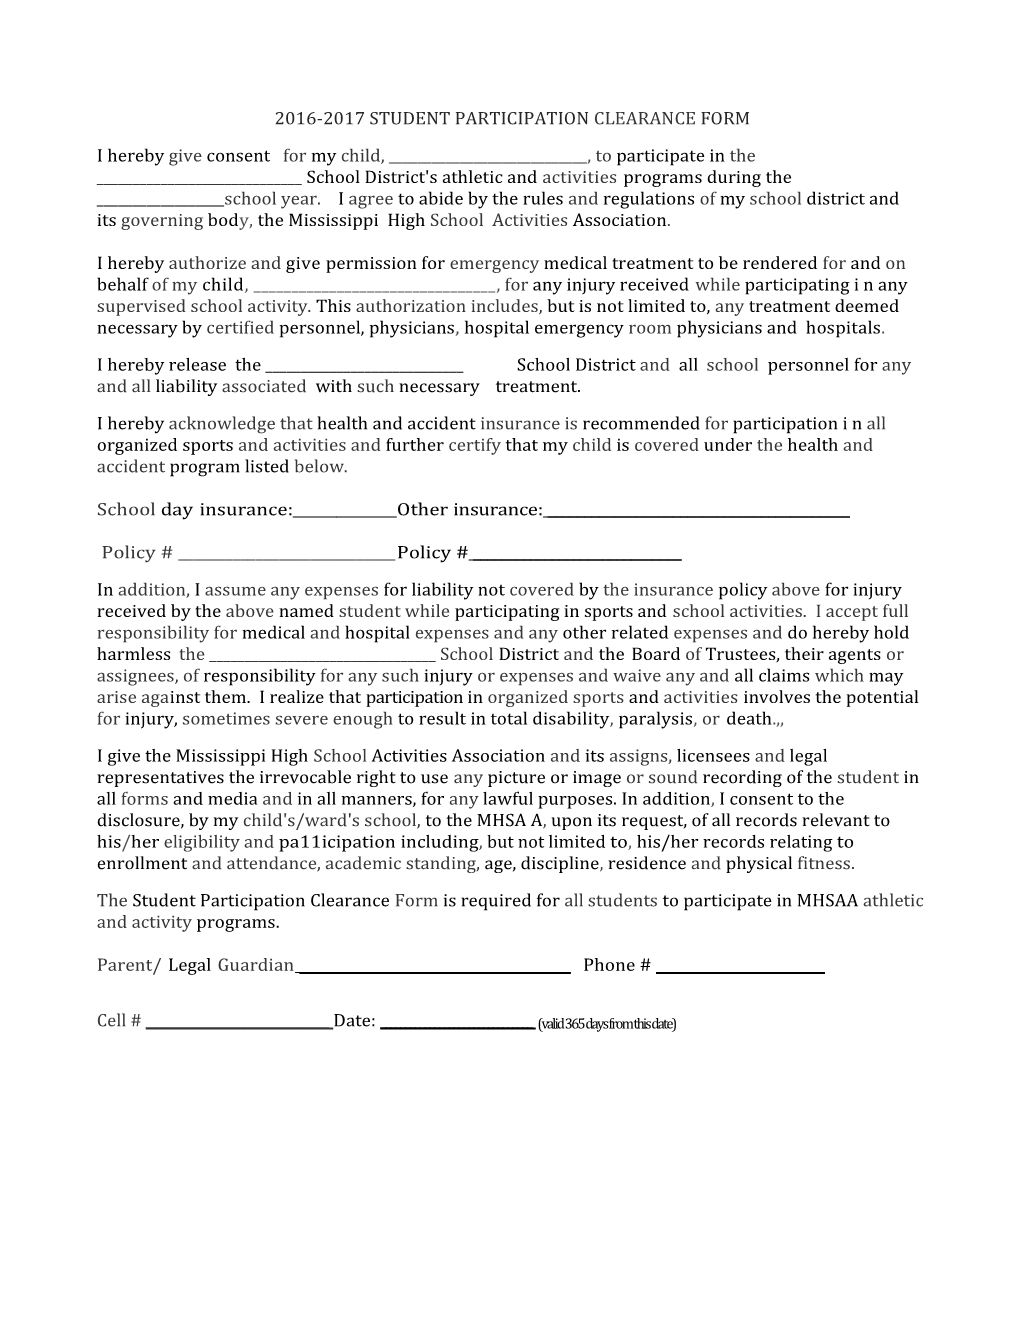 2016-2017 Student Participation Clearance Form